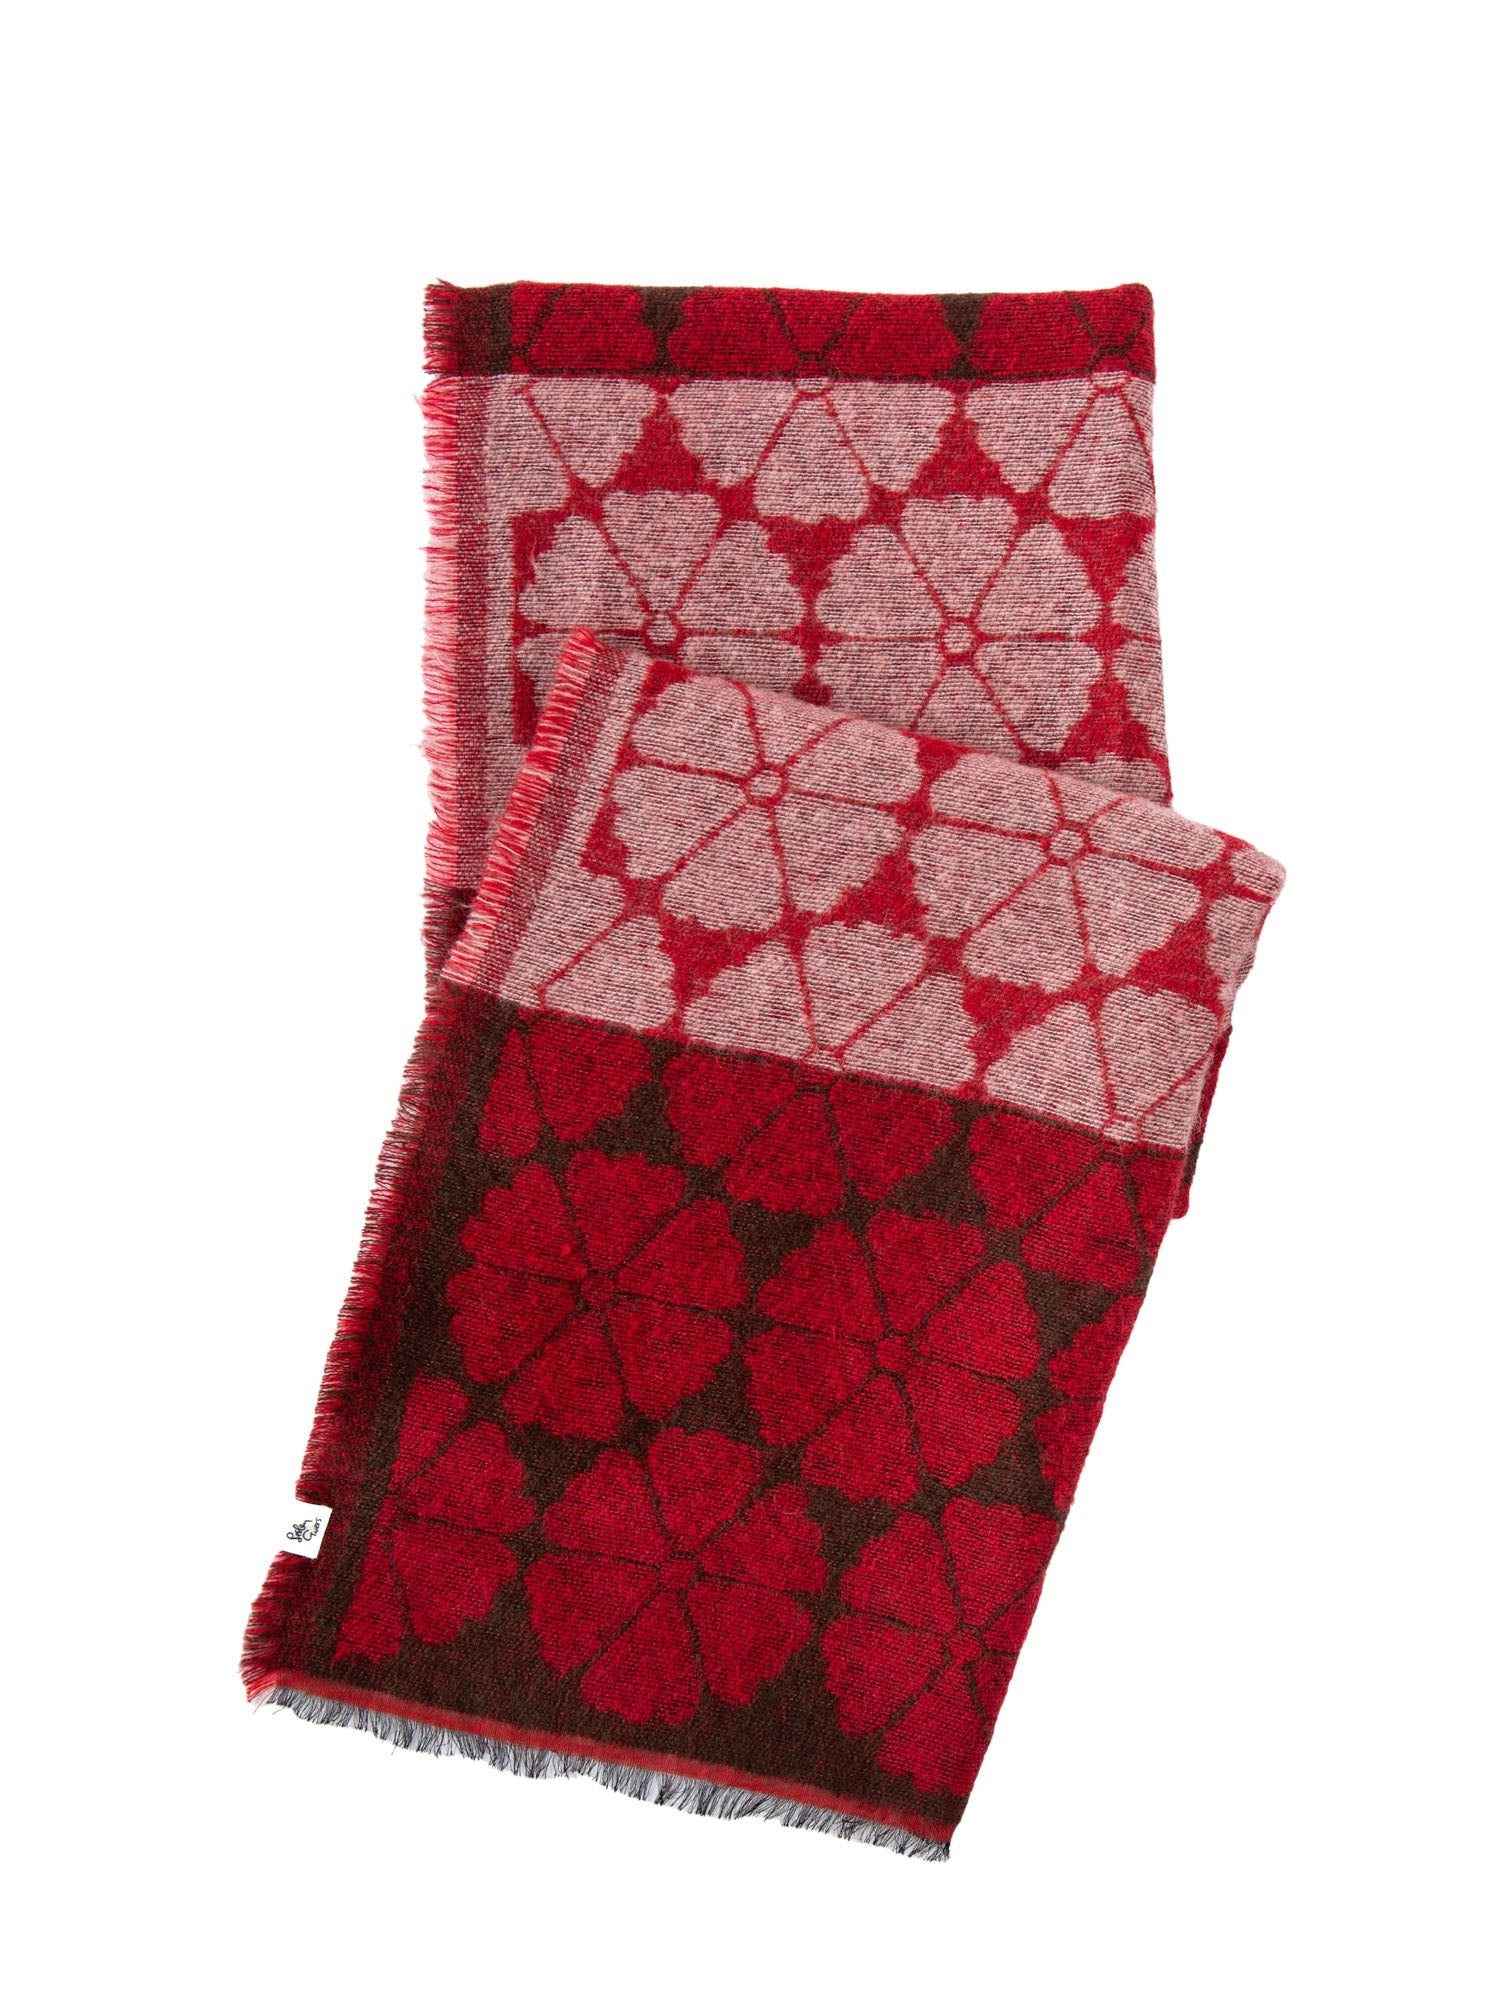 SHANNON scarf Morning Glory Red and Burgundy - Lesley Evers-Accessories-gifts under $75-scarf